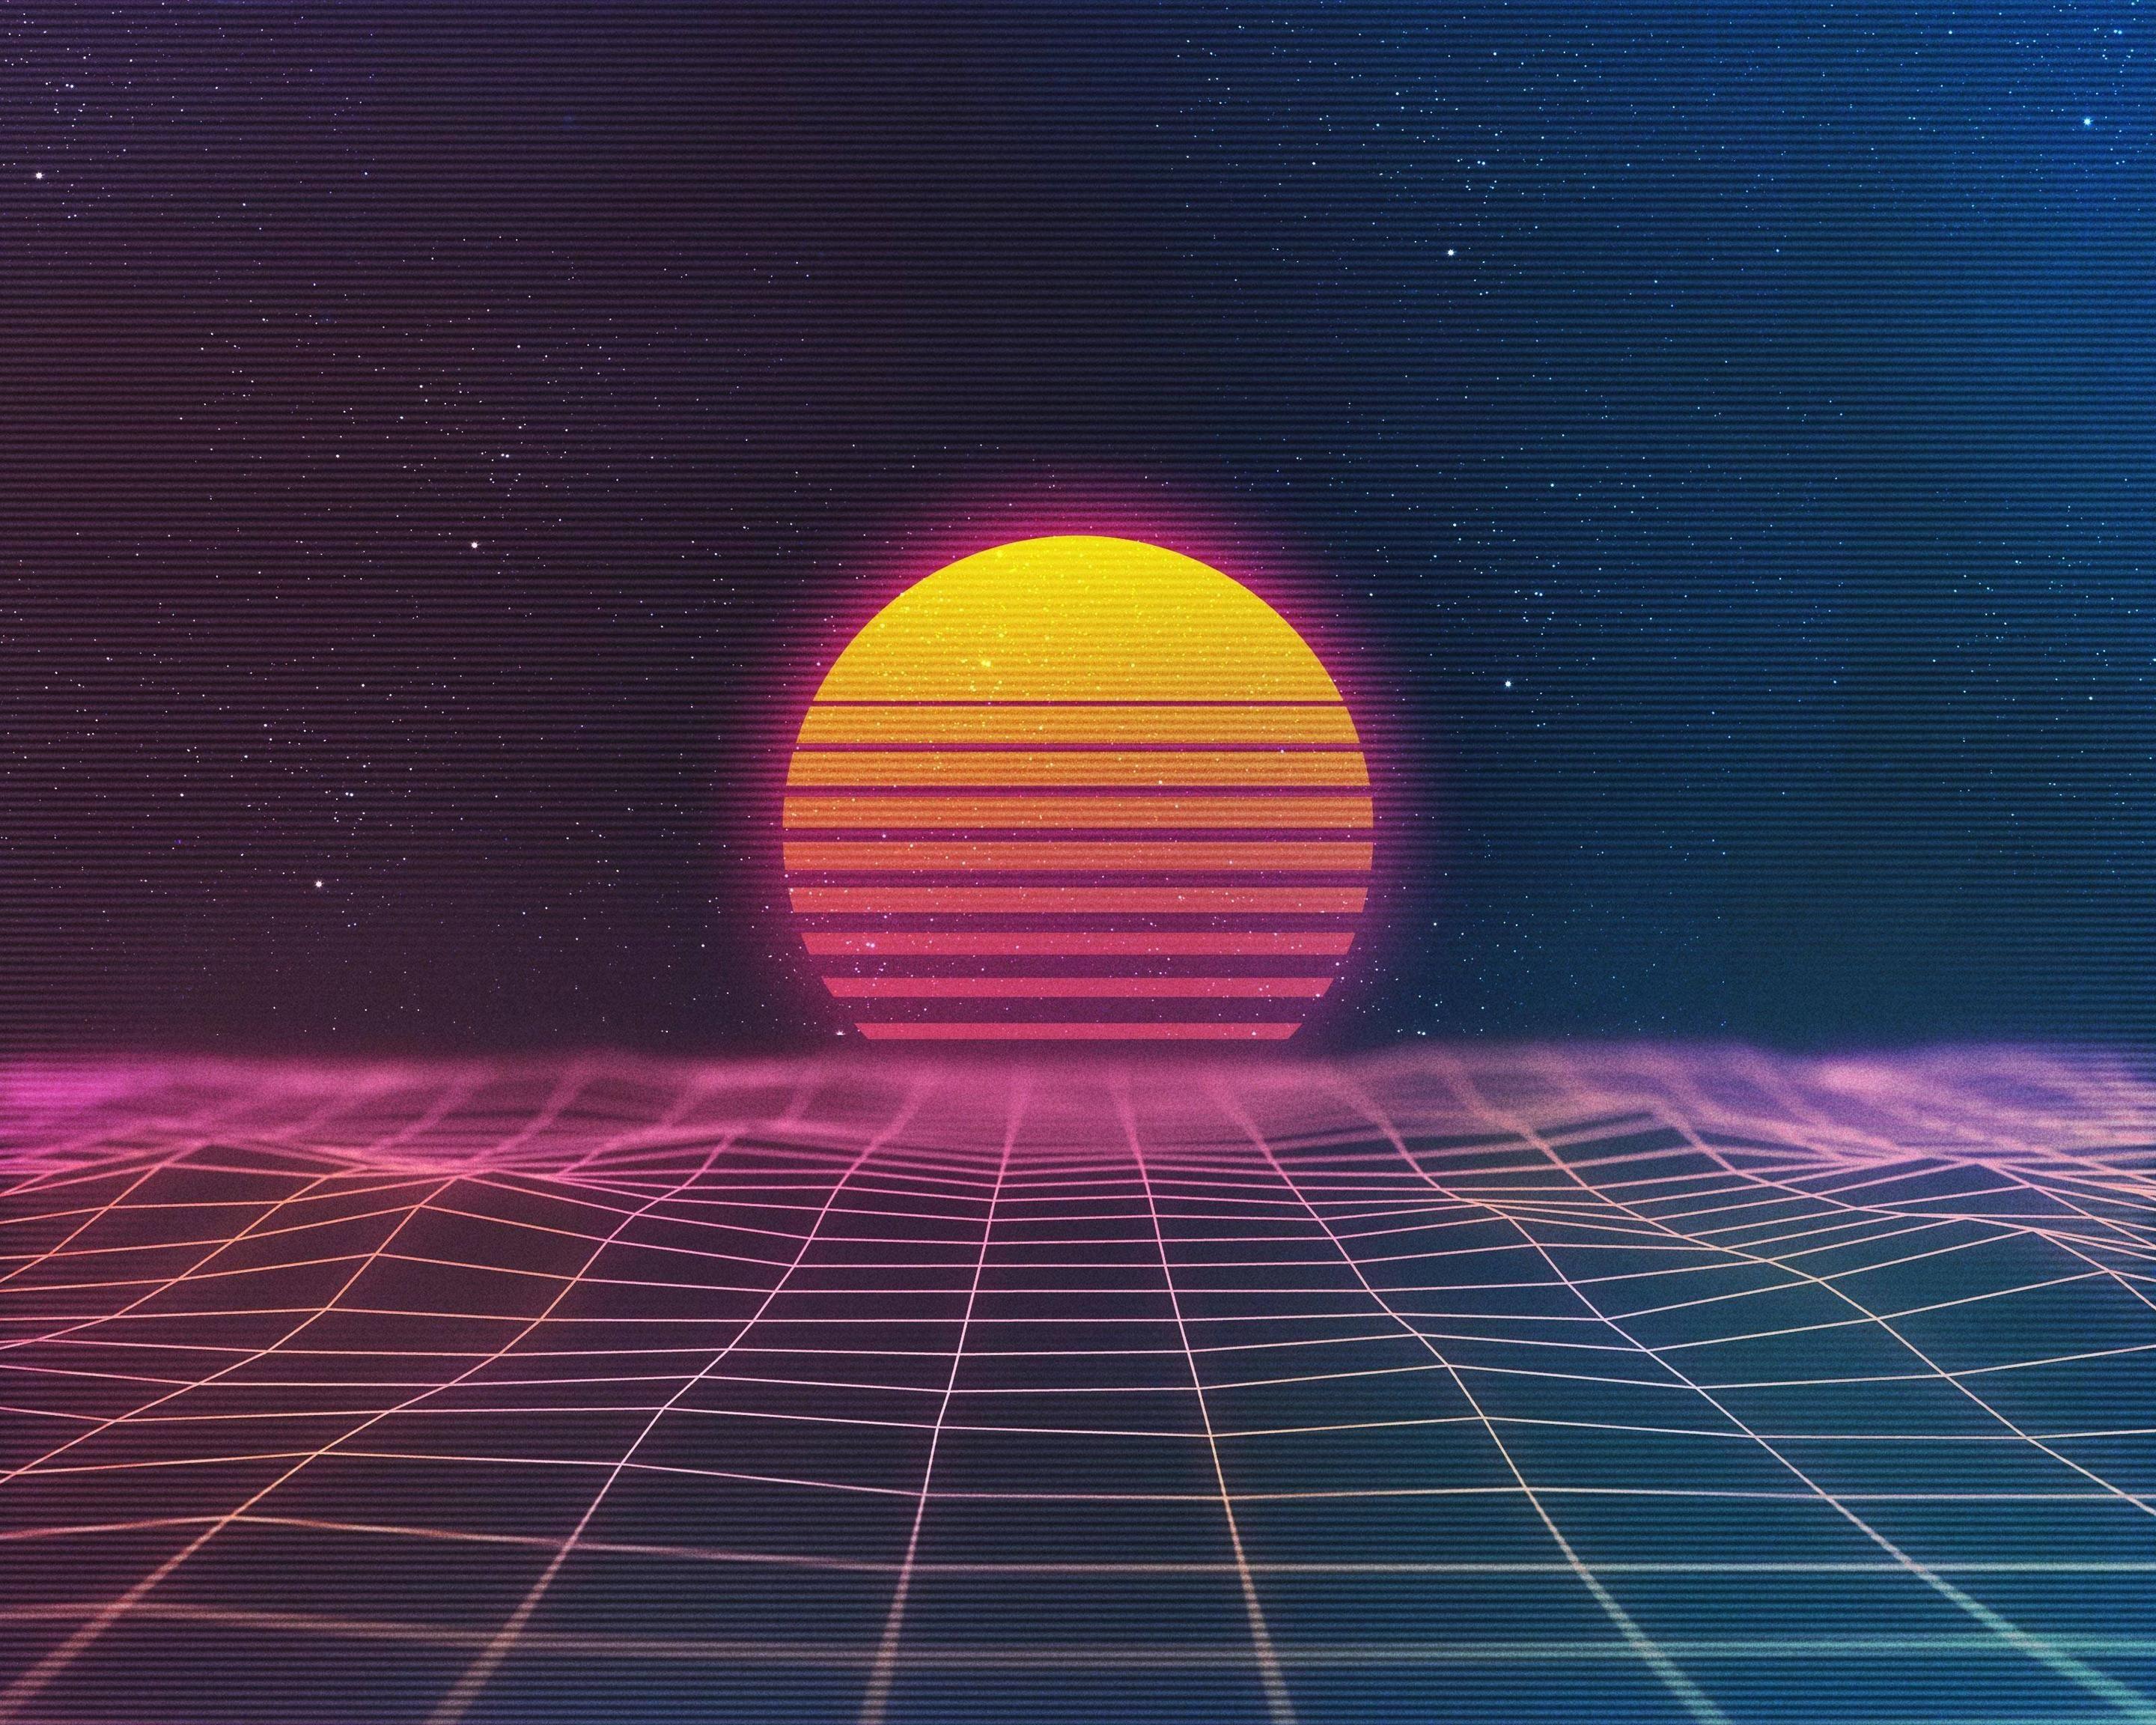 Awesome sunset Retro Wave [3200x2560]. Waves wallpaper, Vaporwave wallpaper, Retro wallpaper